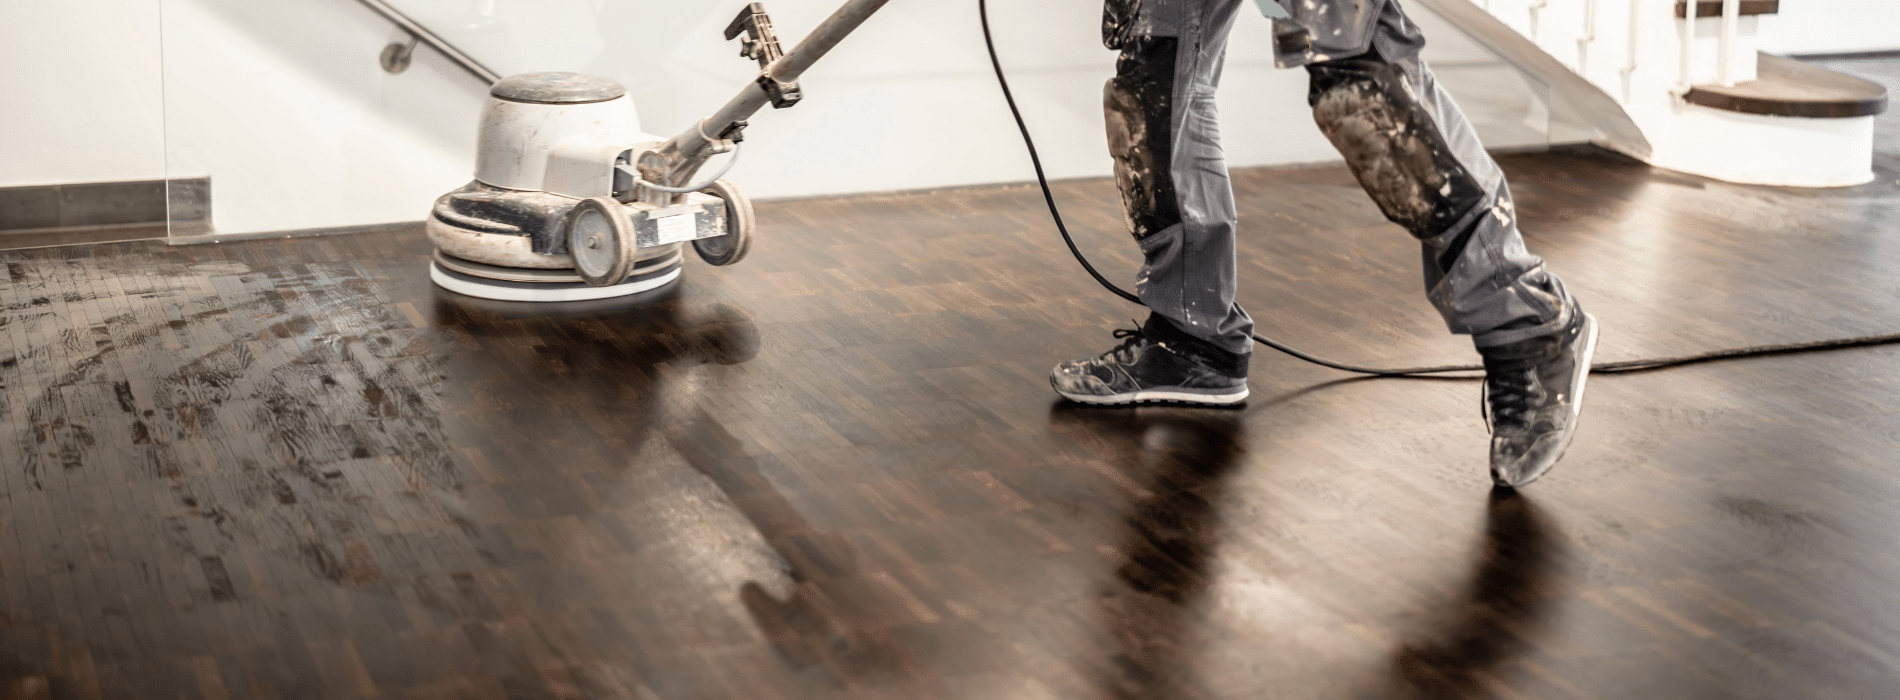 With its impressive Ø 407 mm sanding capacity and 1.9 kW power, exceptional results are achieved. The sander, connected to a dust extraction system with a HEPA filter, ensures a clean and efficient process. 